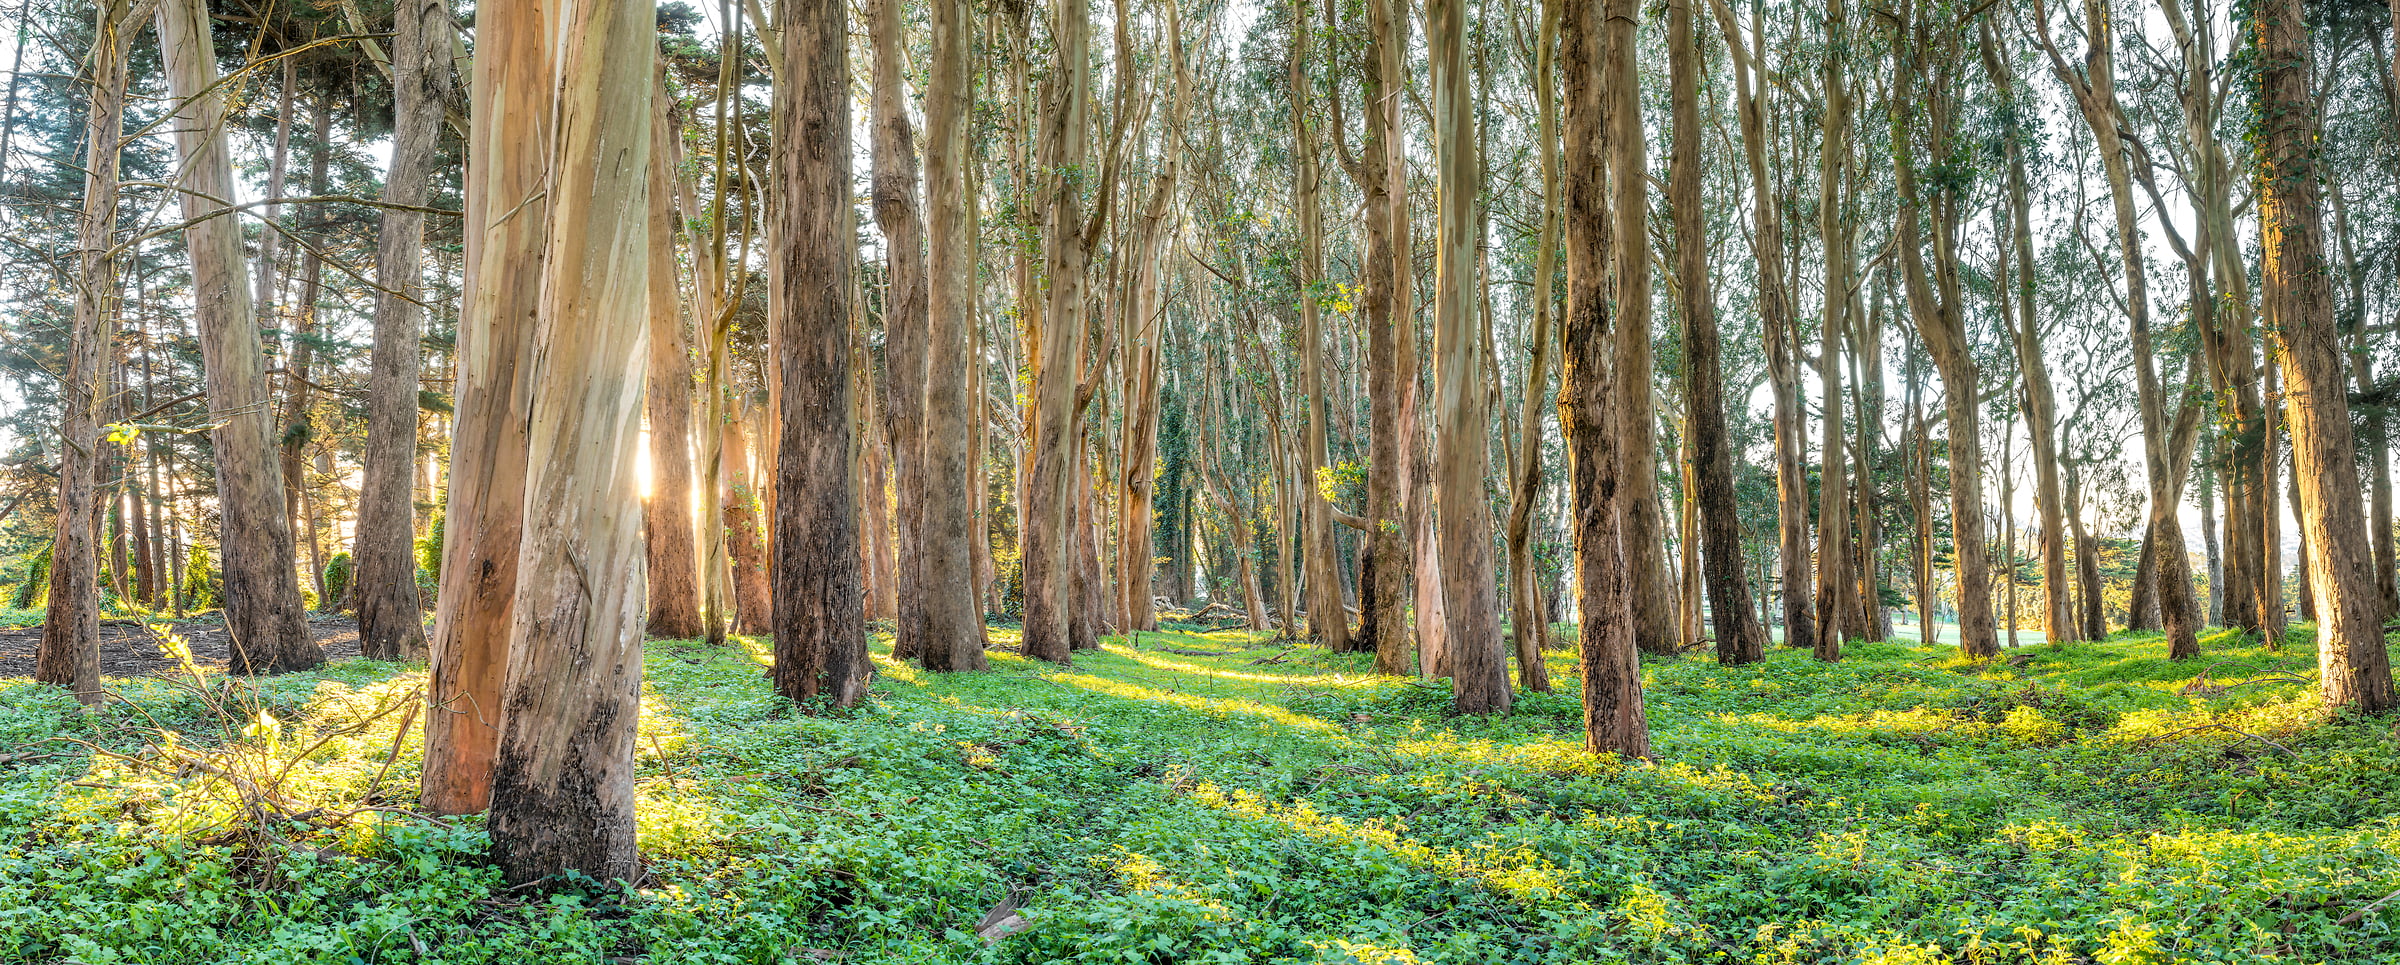 369 megapixels! A very high resolution, large-format VAST photo print of eucalyptus trees in the Presidio of San Francisco; fine art nature photo created by Justin Katz in California